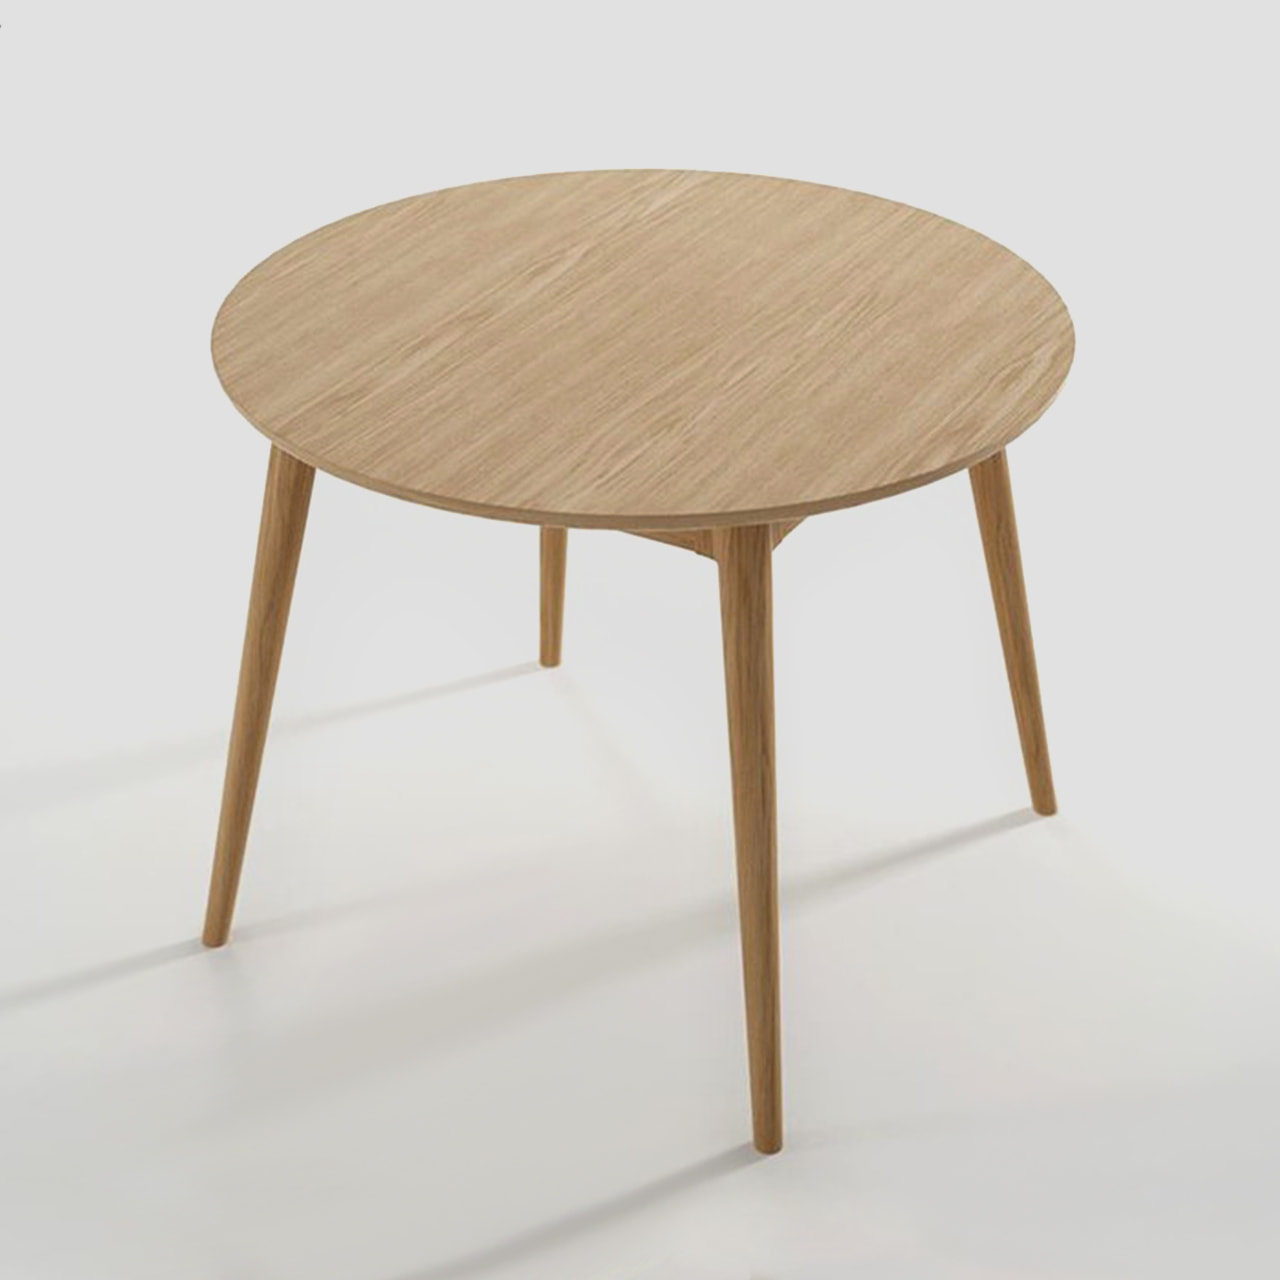 Round Wooden Dining Tables // Our Top 8 Picks - aêtava